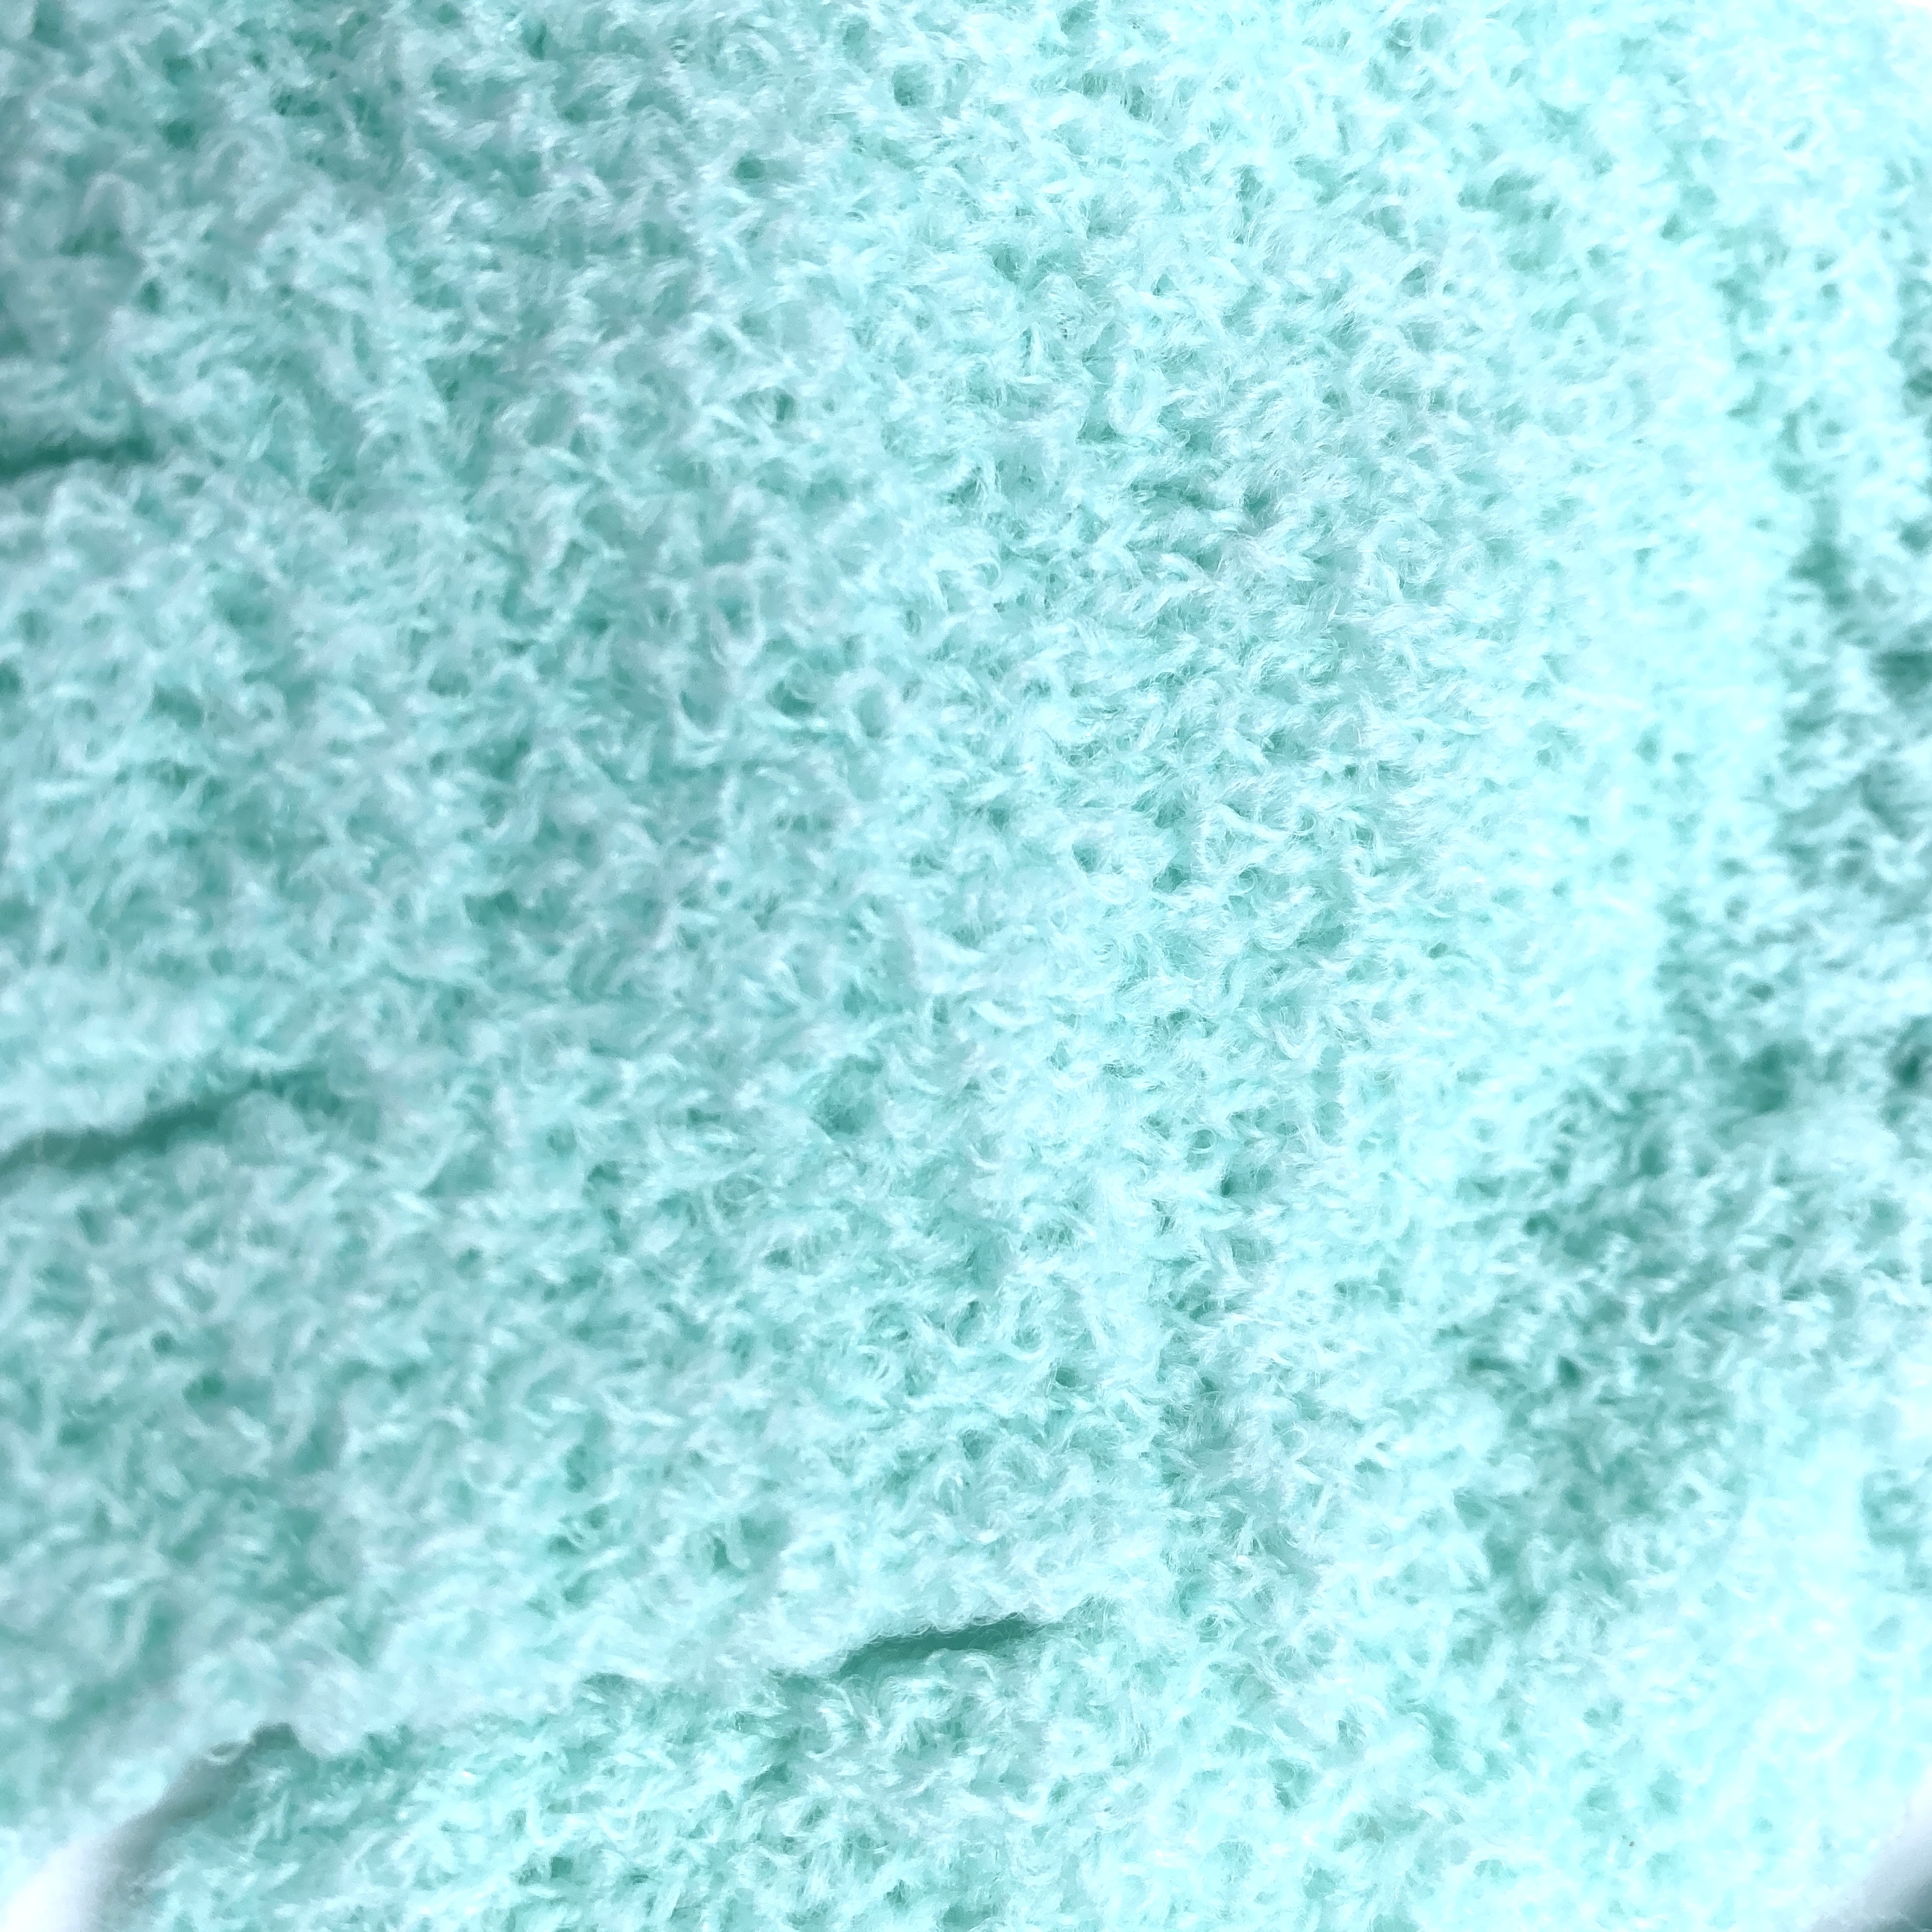 CleanLogic Exfoliating Bath Gloves Close-Up for Cocotique January 2021